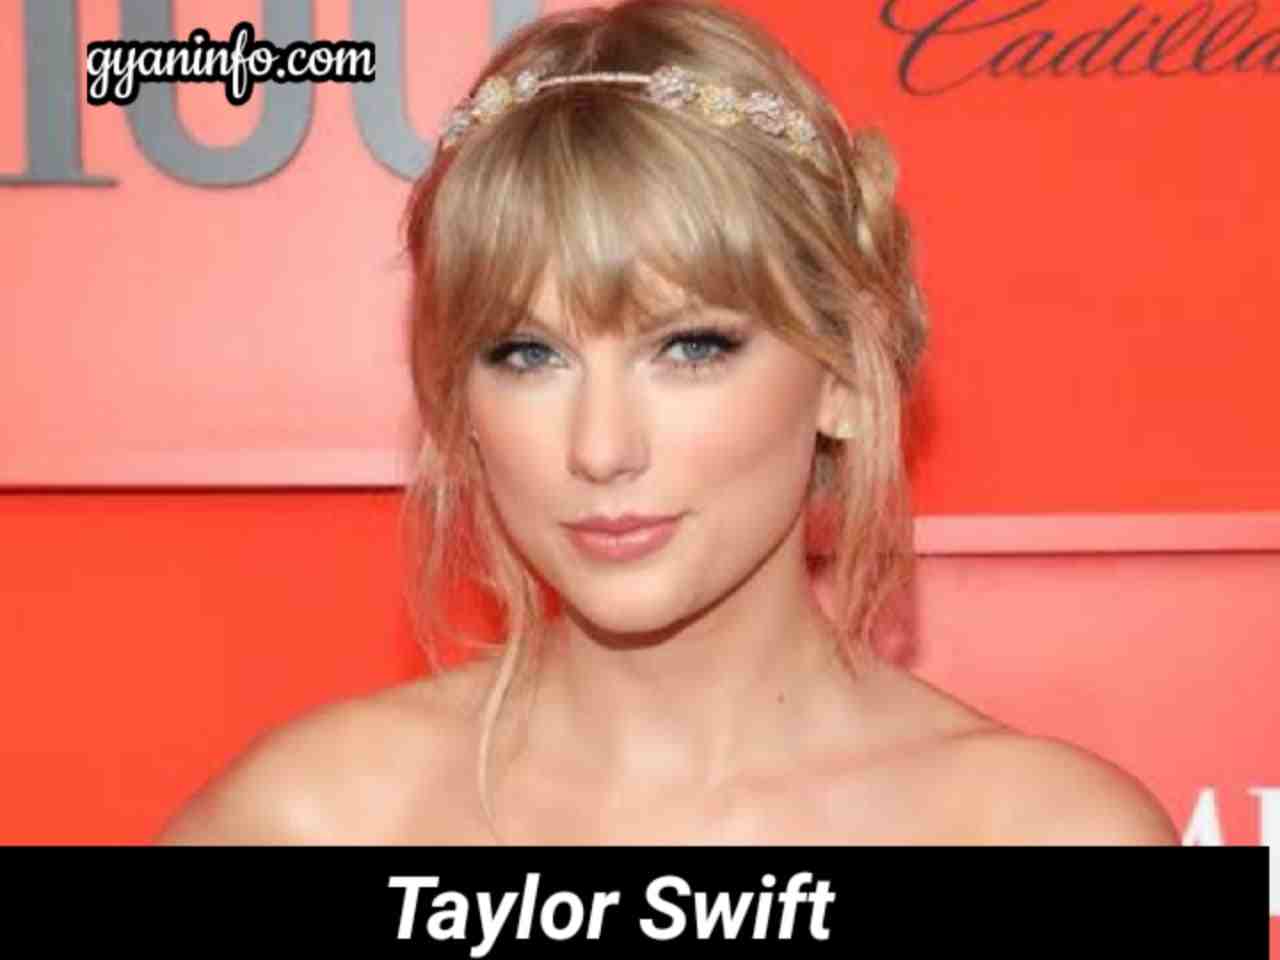 Taylor Swift [American Singer] Biography, Height, Age, Weight, Body Measurements, Boyfriend, Wiki, Net Worth & More